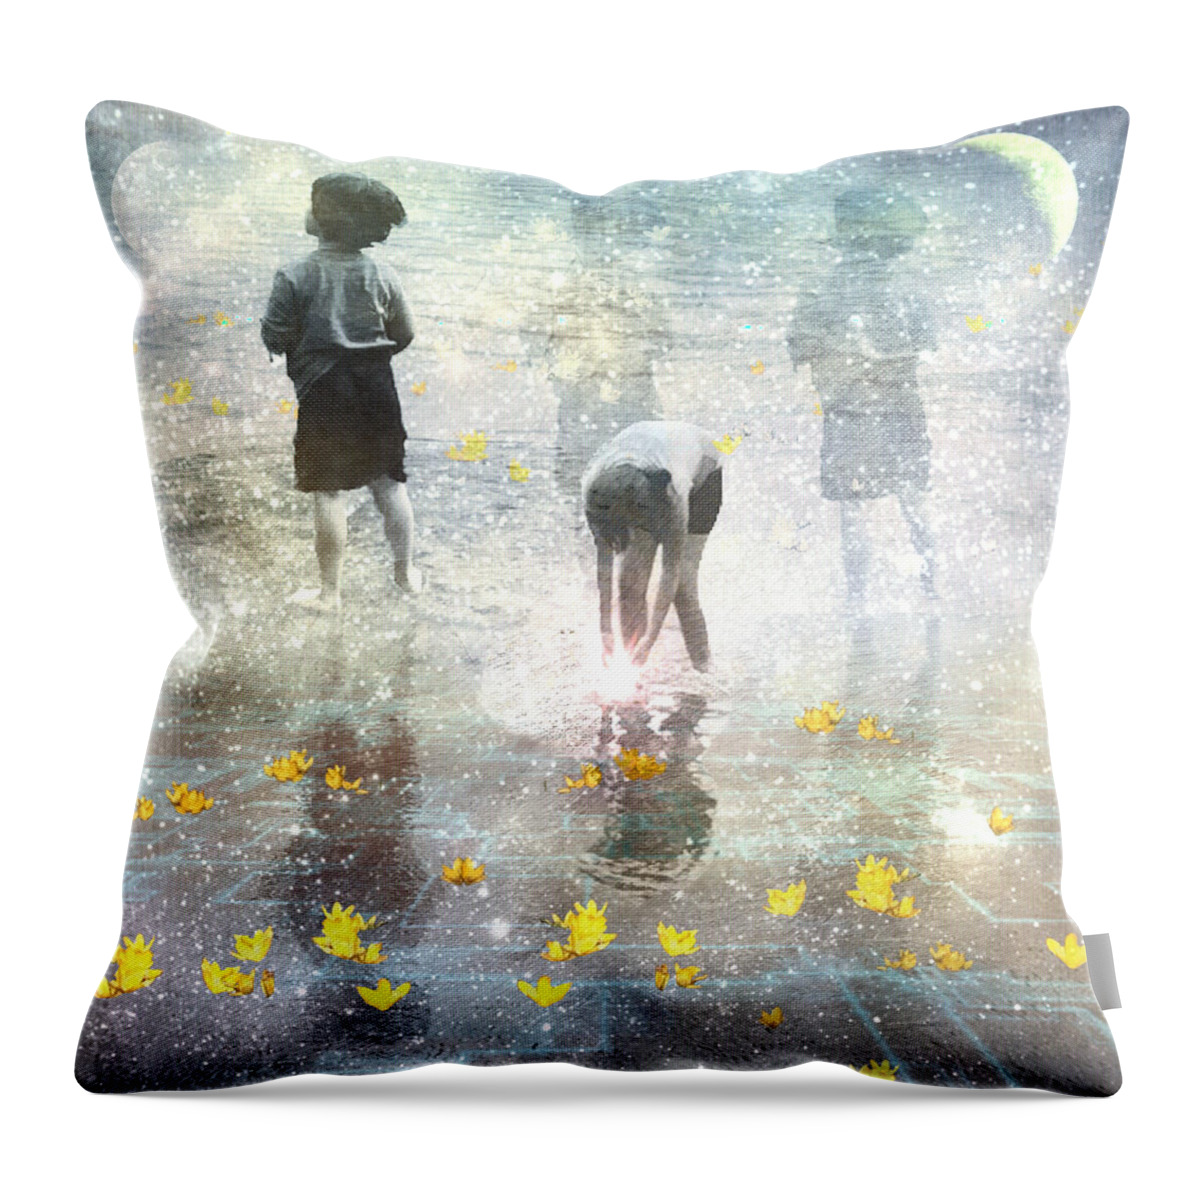 Digital Art Throw Pillow featuring the digital art By The Light Of The Magical Moon by Melissa D Johnston